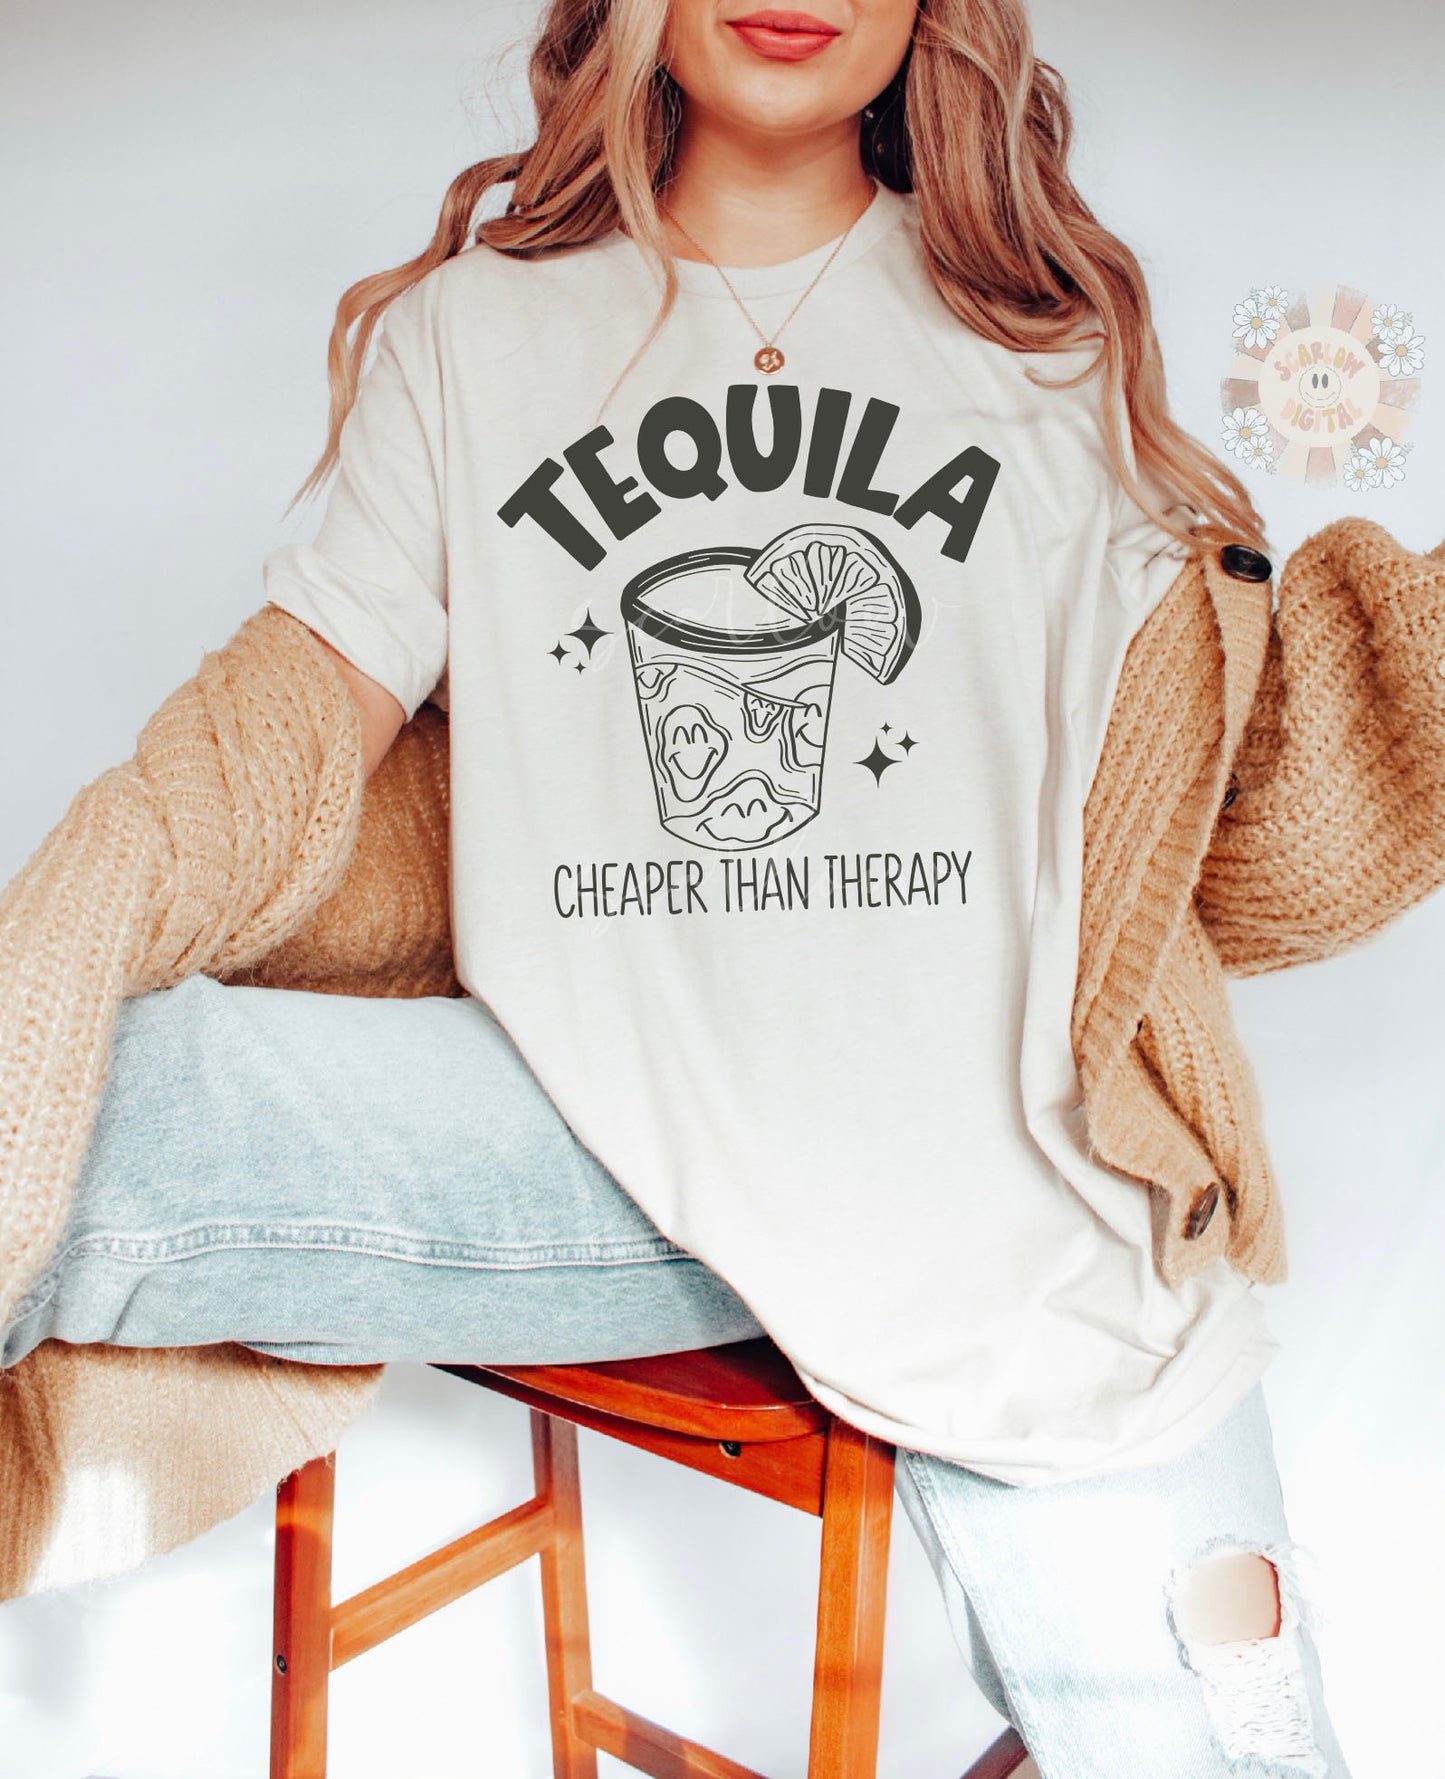 Cheaper Than Therapy SVG-Tequila Cricut Cut File Digital Design Download-drinking svg, agave svg, cinco de mayo svg, summer svg, trippy svg